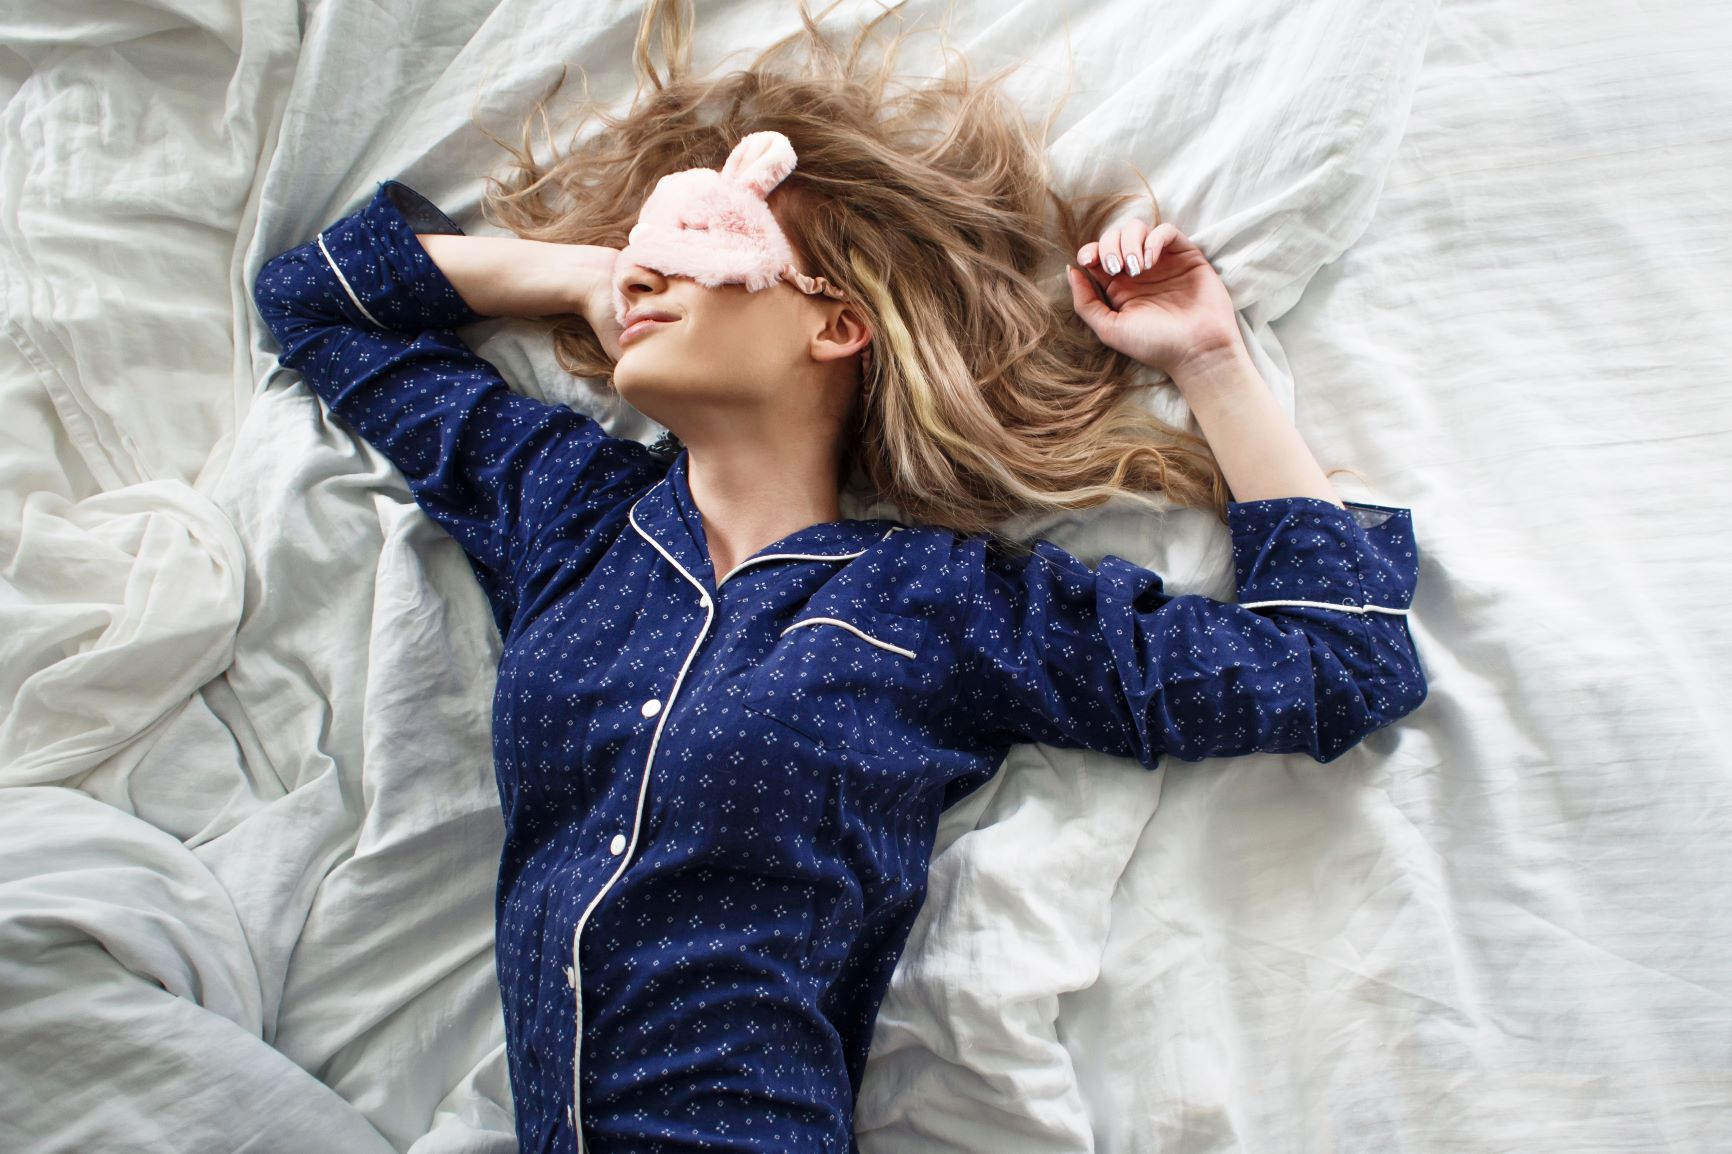 Therapedic  Blog - What do you wear to bed and how does it affect sleep? -  Therapedic